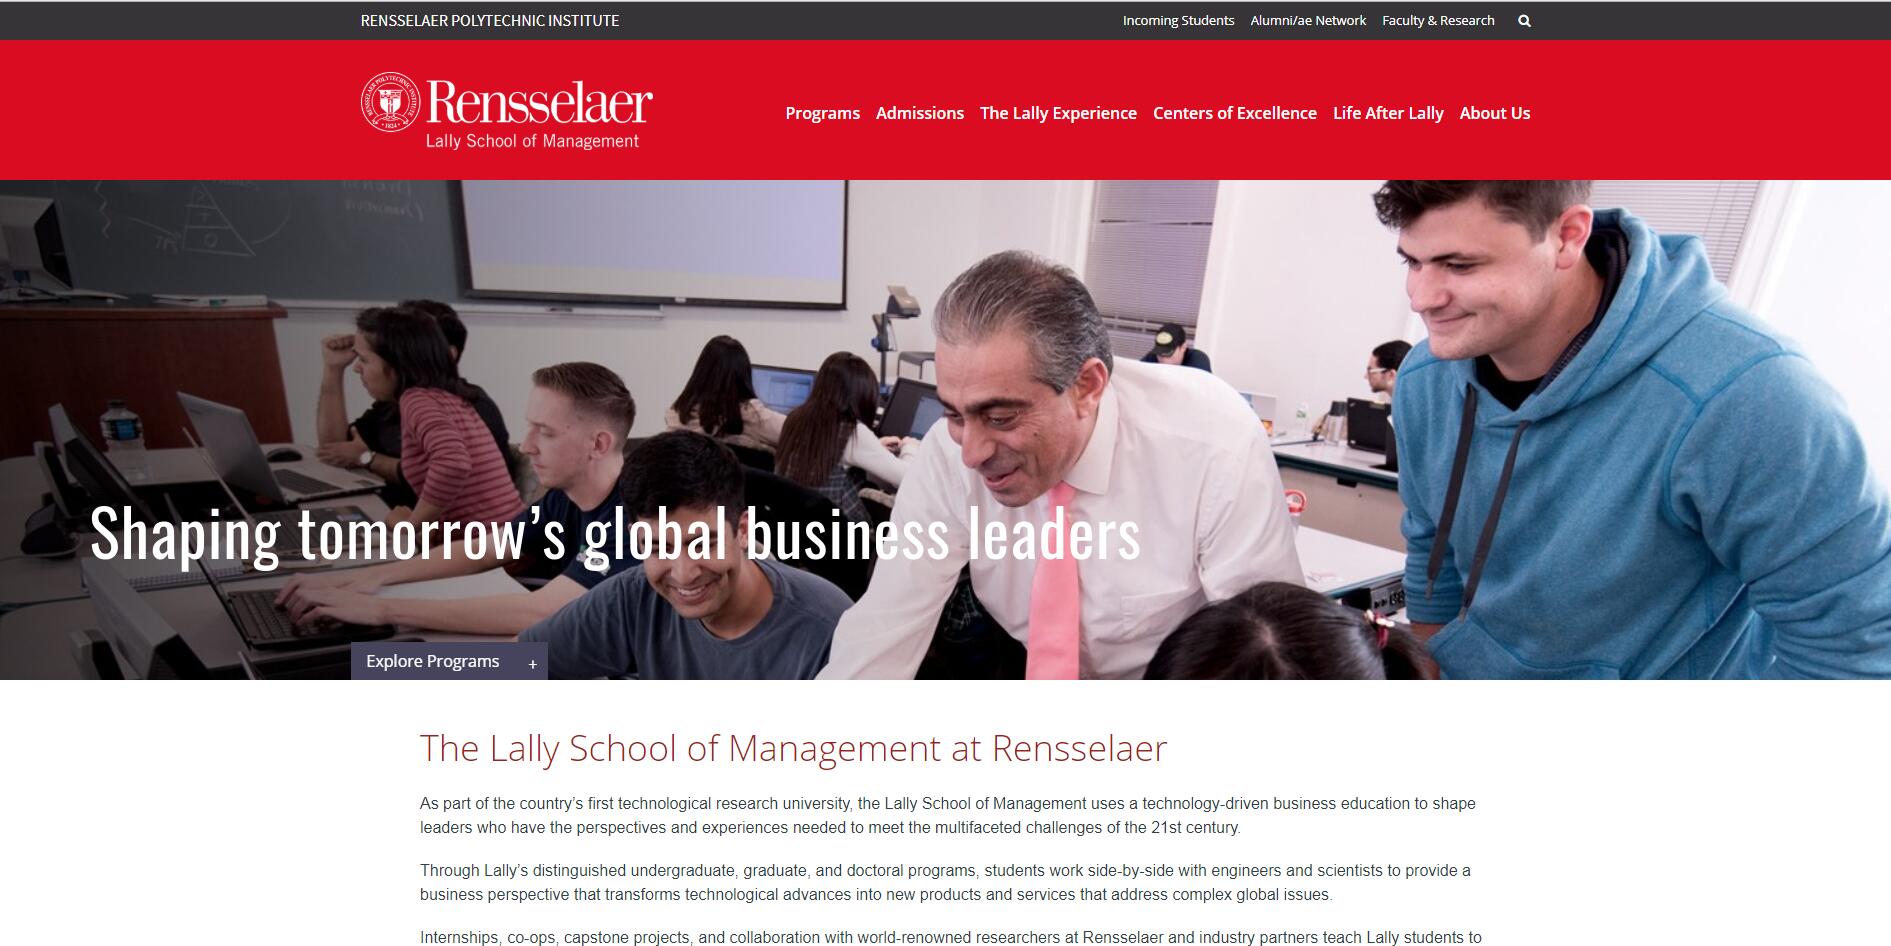 The Lally School of Management and Technology at Rensselaer Polytechnic Institute